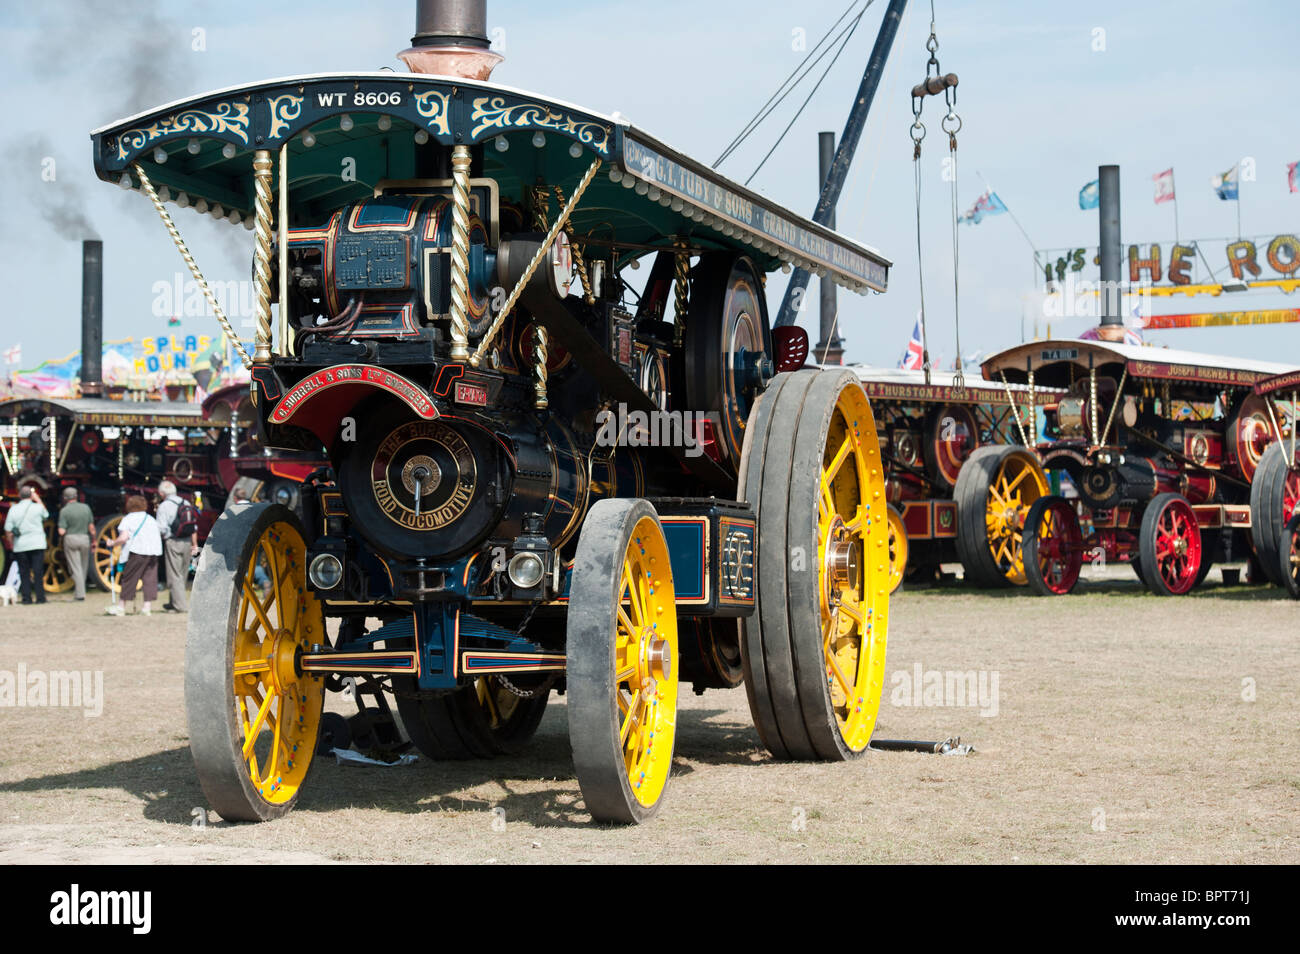 Burrell Showmans Steam traction engine, 4000 Ex Mayor at the Great Dorset steam fair 2010, England Stock Photo